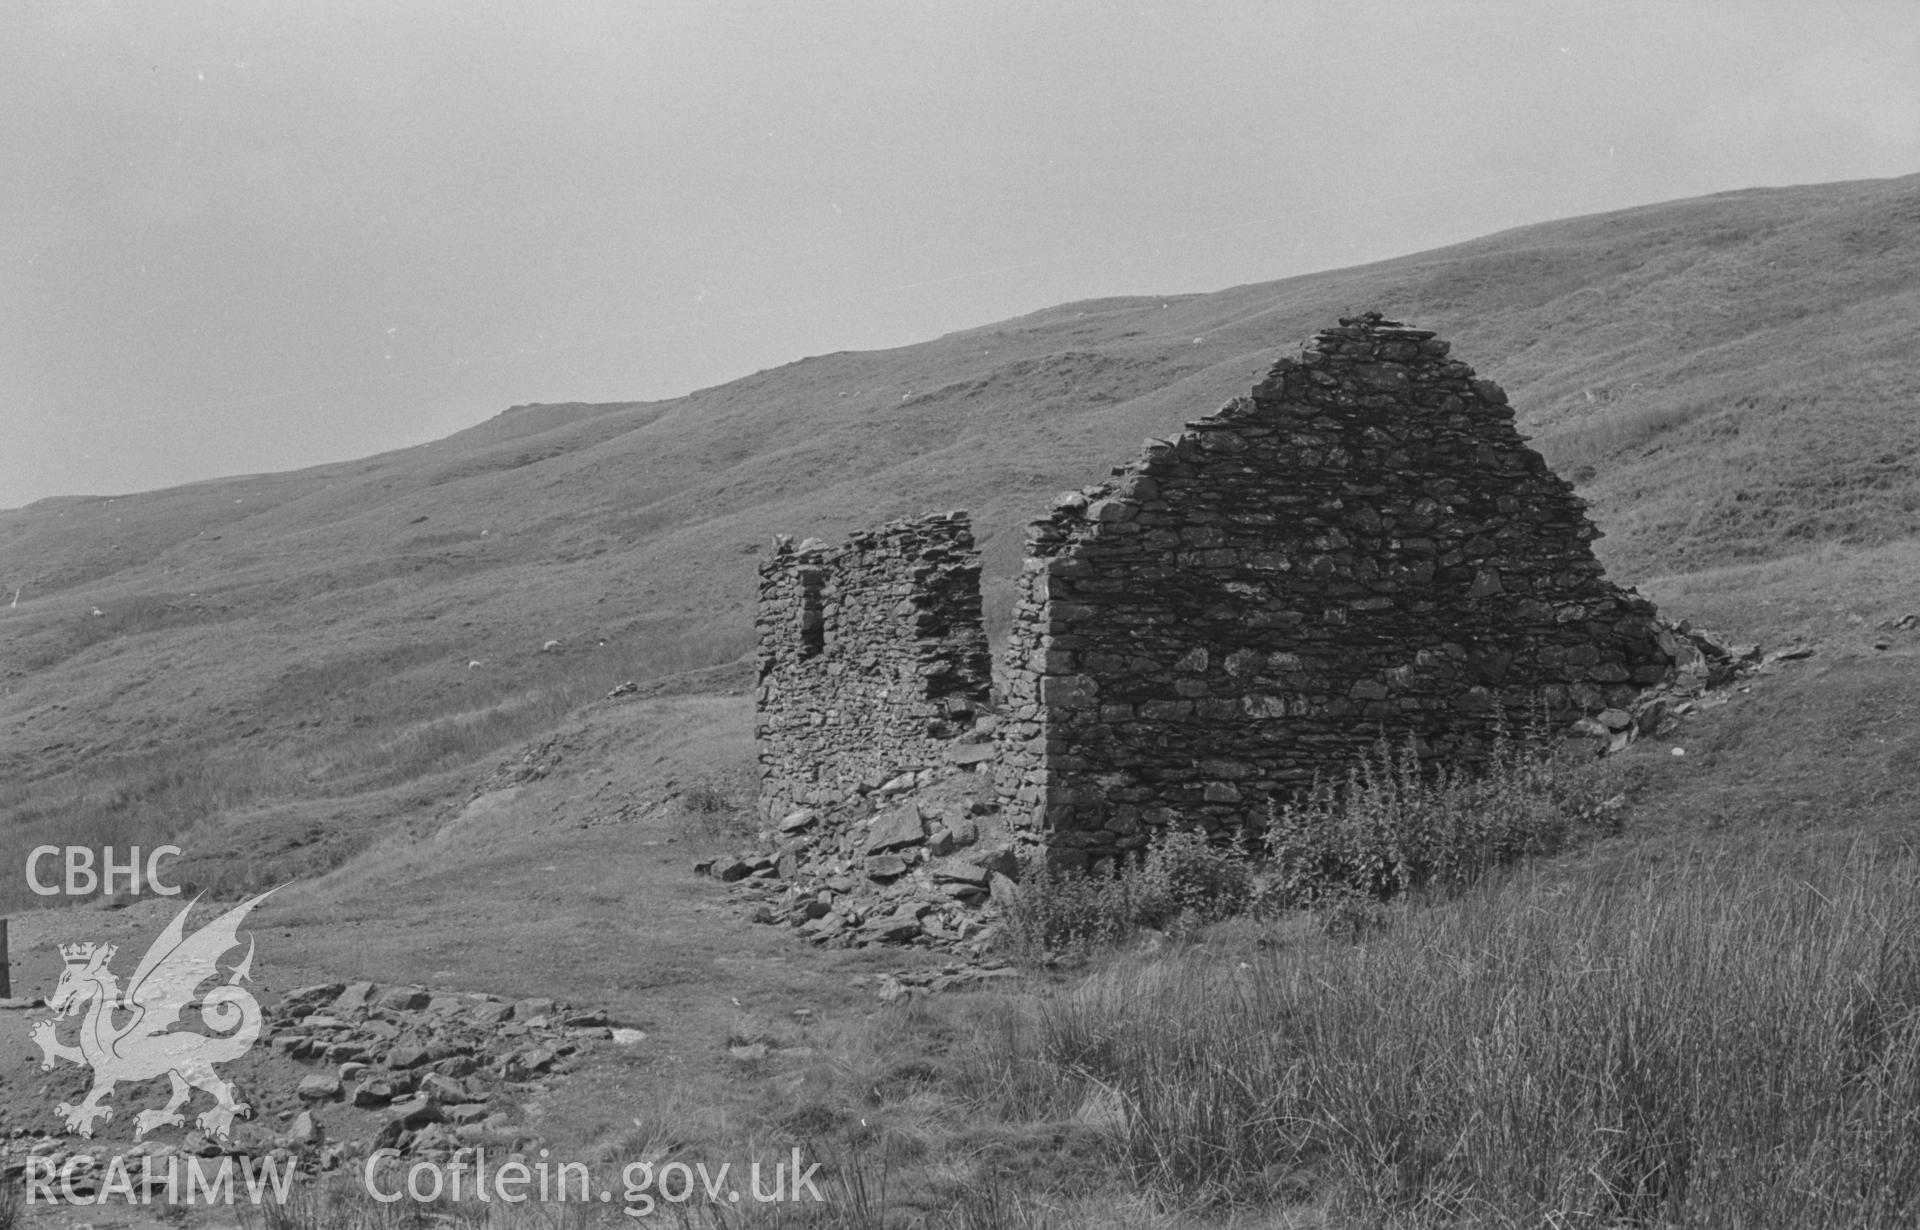 Digital copy of a black and white negative showing ruined building by track on west side of Pumlumon mine. Photographed by Arthur O. Chater in August 1967. (Looking south west from Grid Reference SN 795 865).